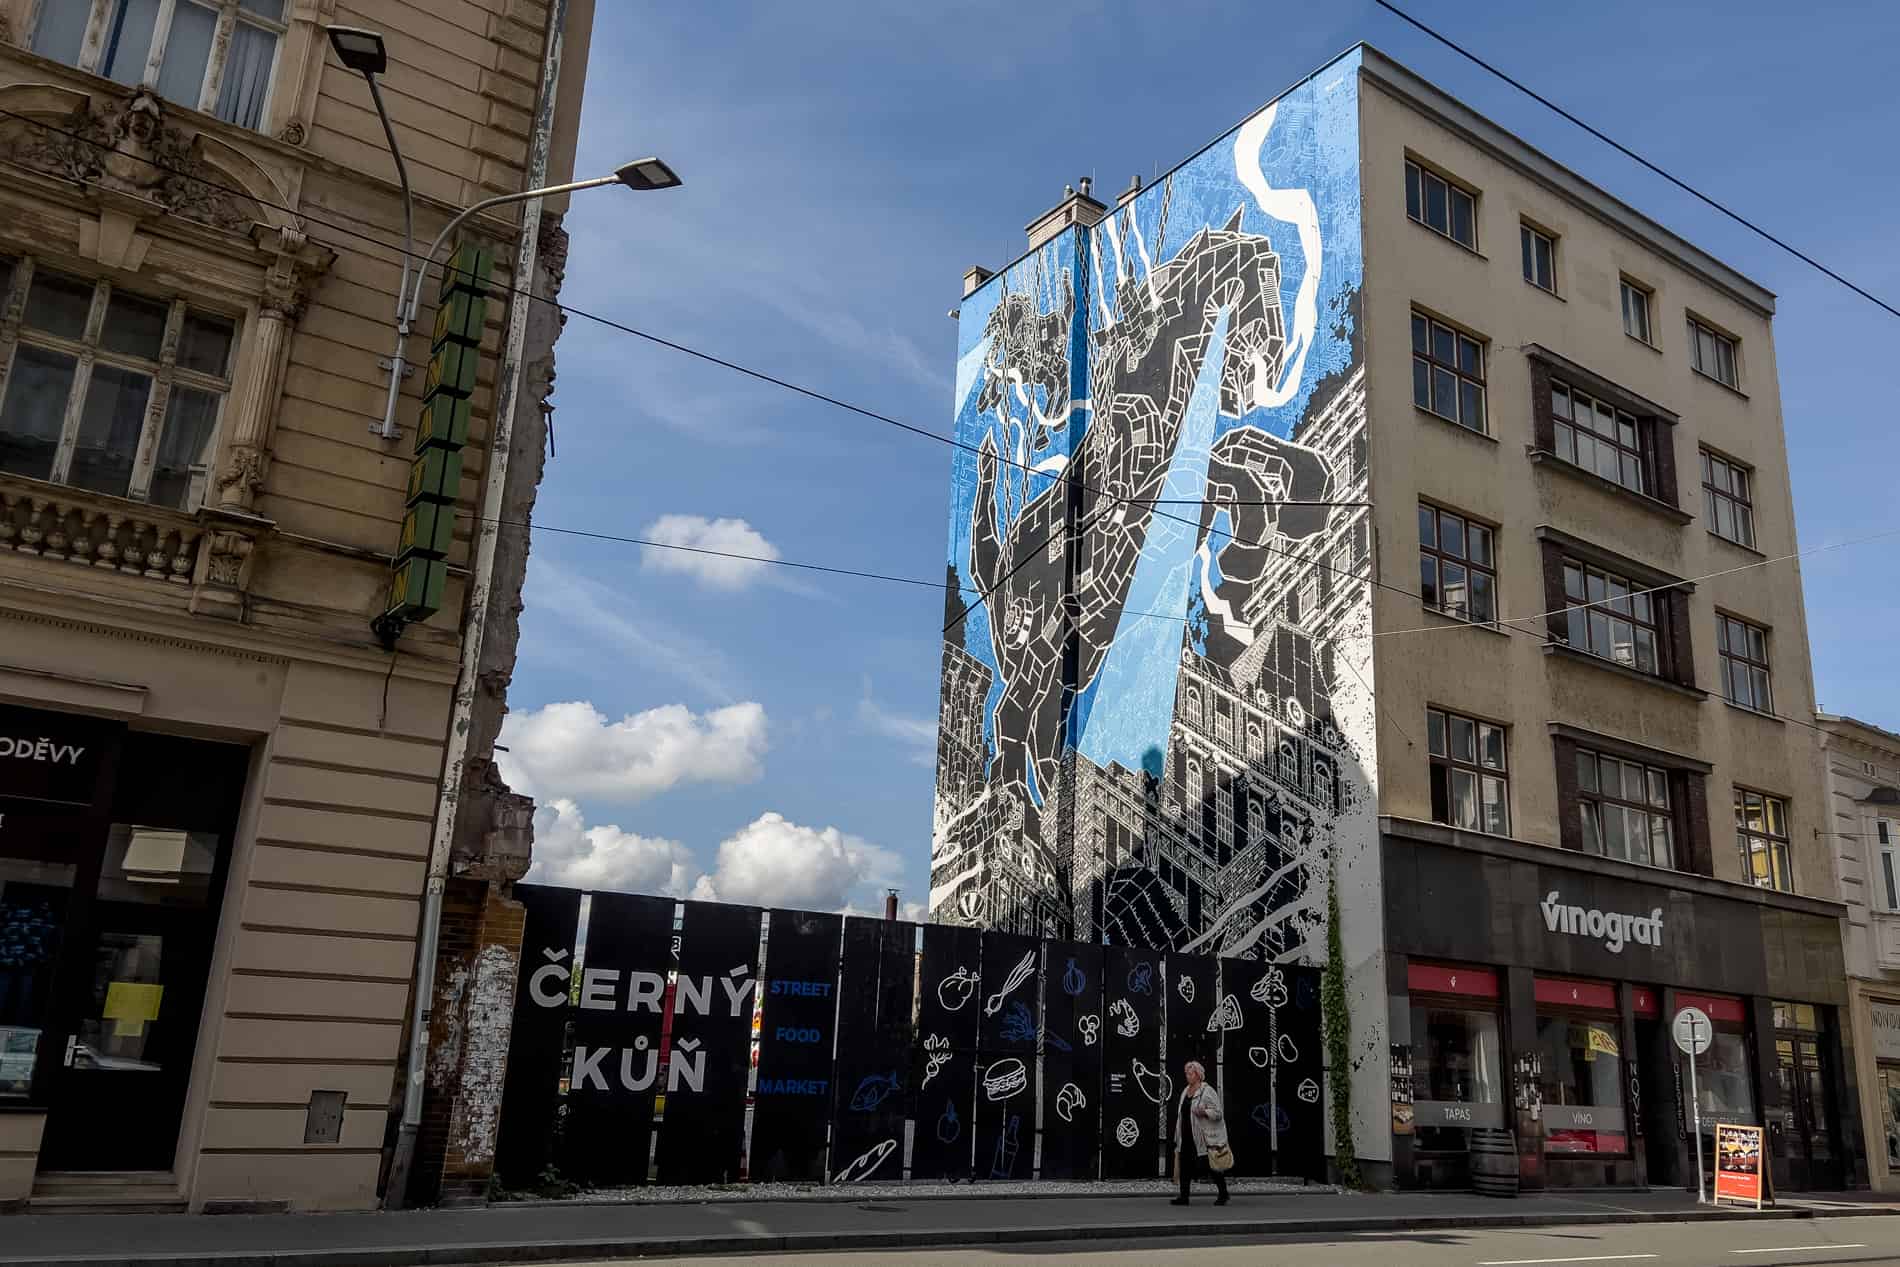 Street art mural in Ostrava of a black horse galloping over the city.